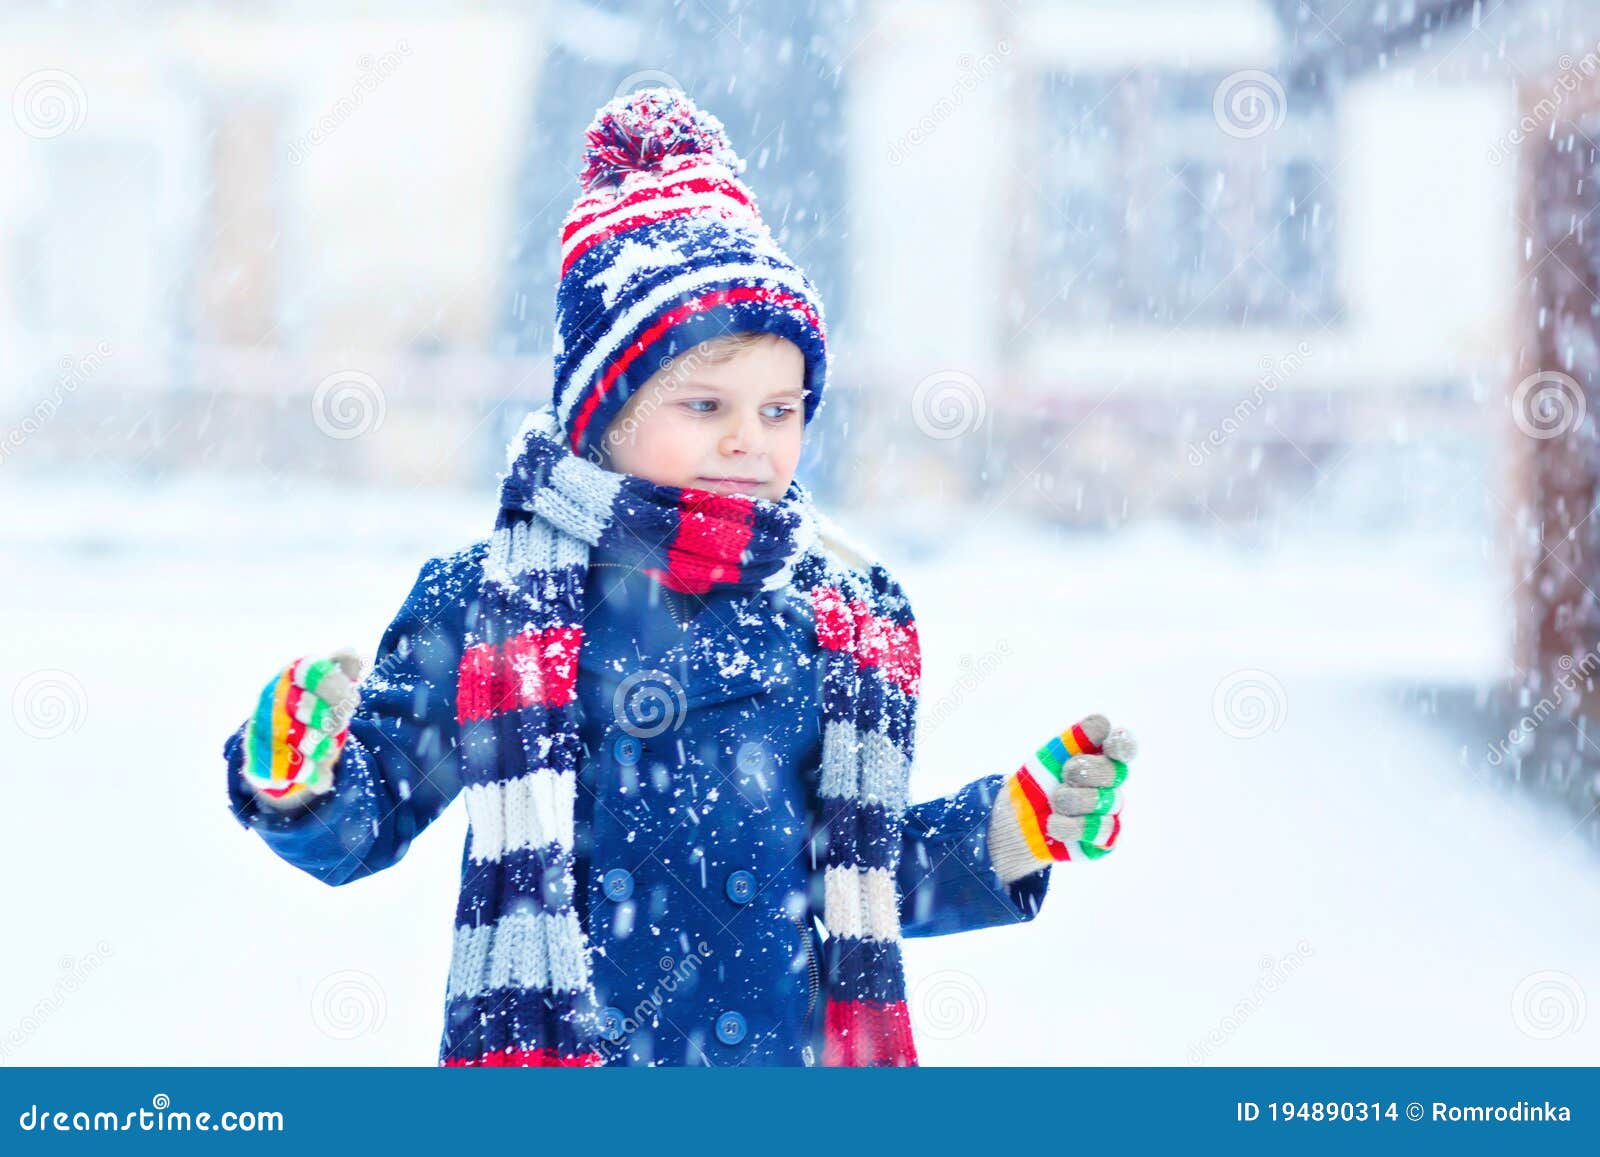 Cute Little Funny Child in Colorful Winter Fashion Clothes Having